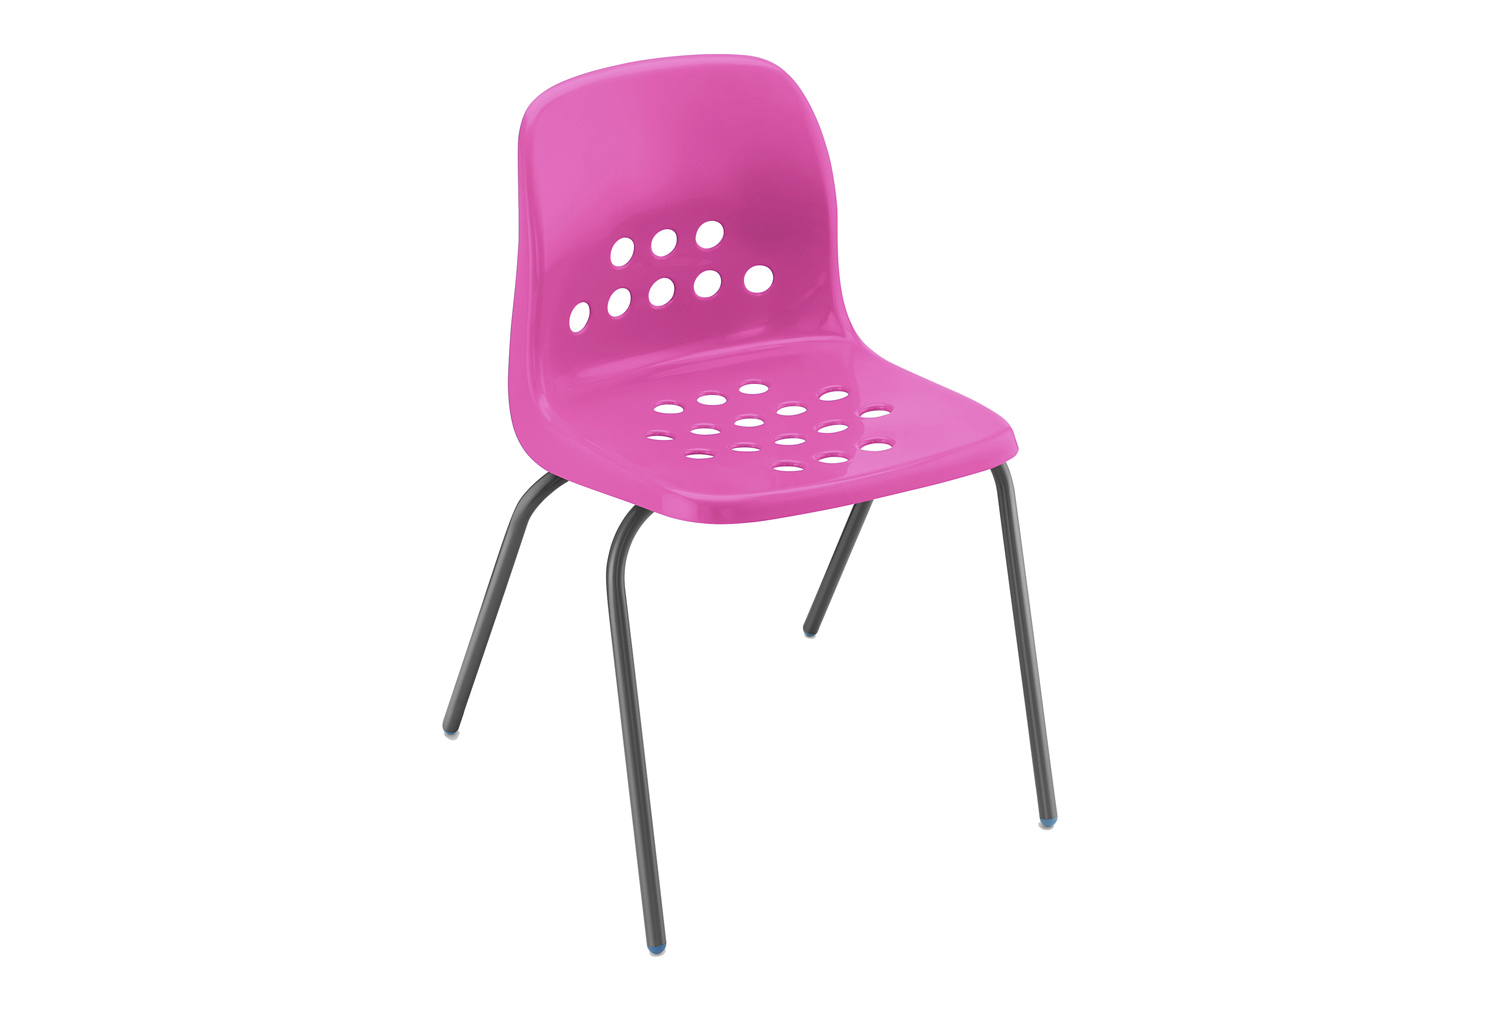 Qty 8 - Hille Pepperpot Classroom Chair, 14+ Years - 40wx41dx46h (cm), Grey Frame, Pink